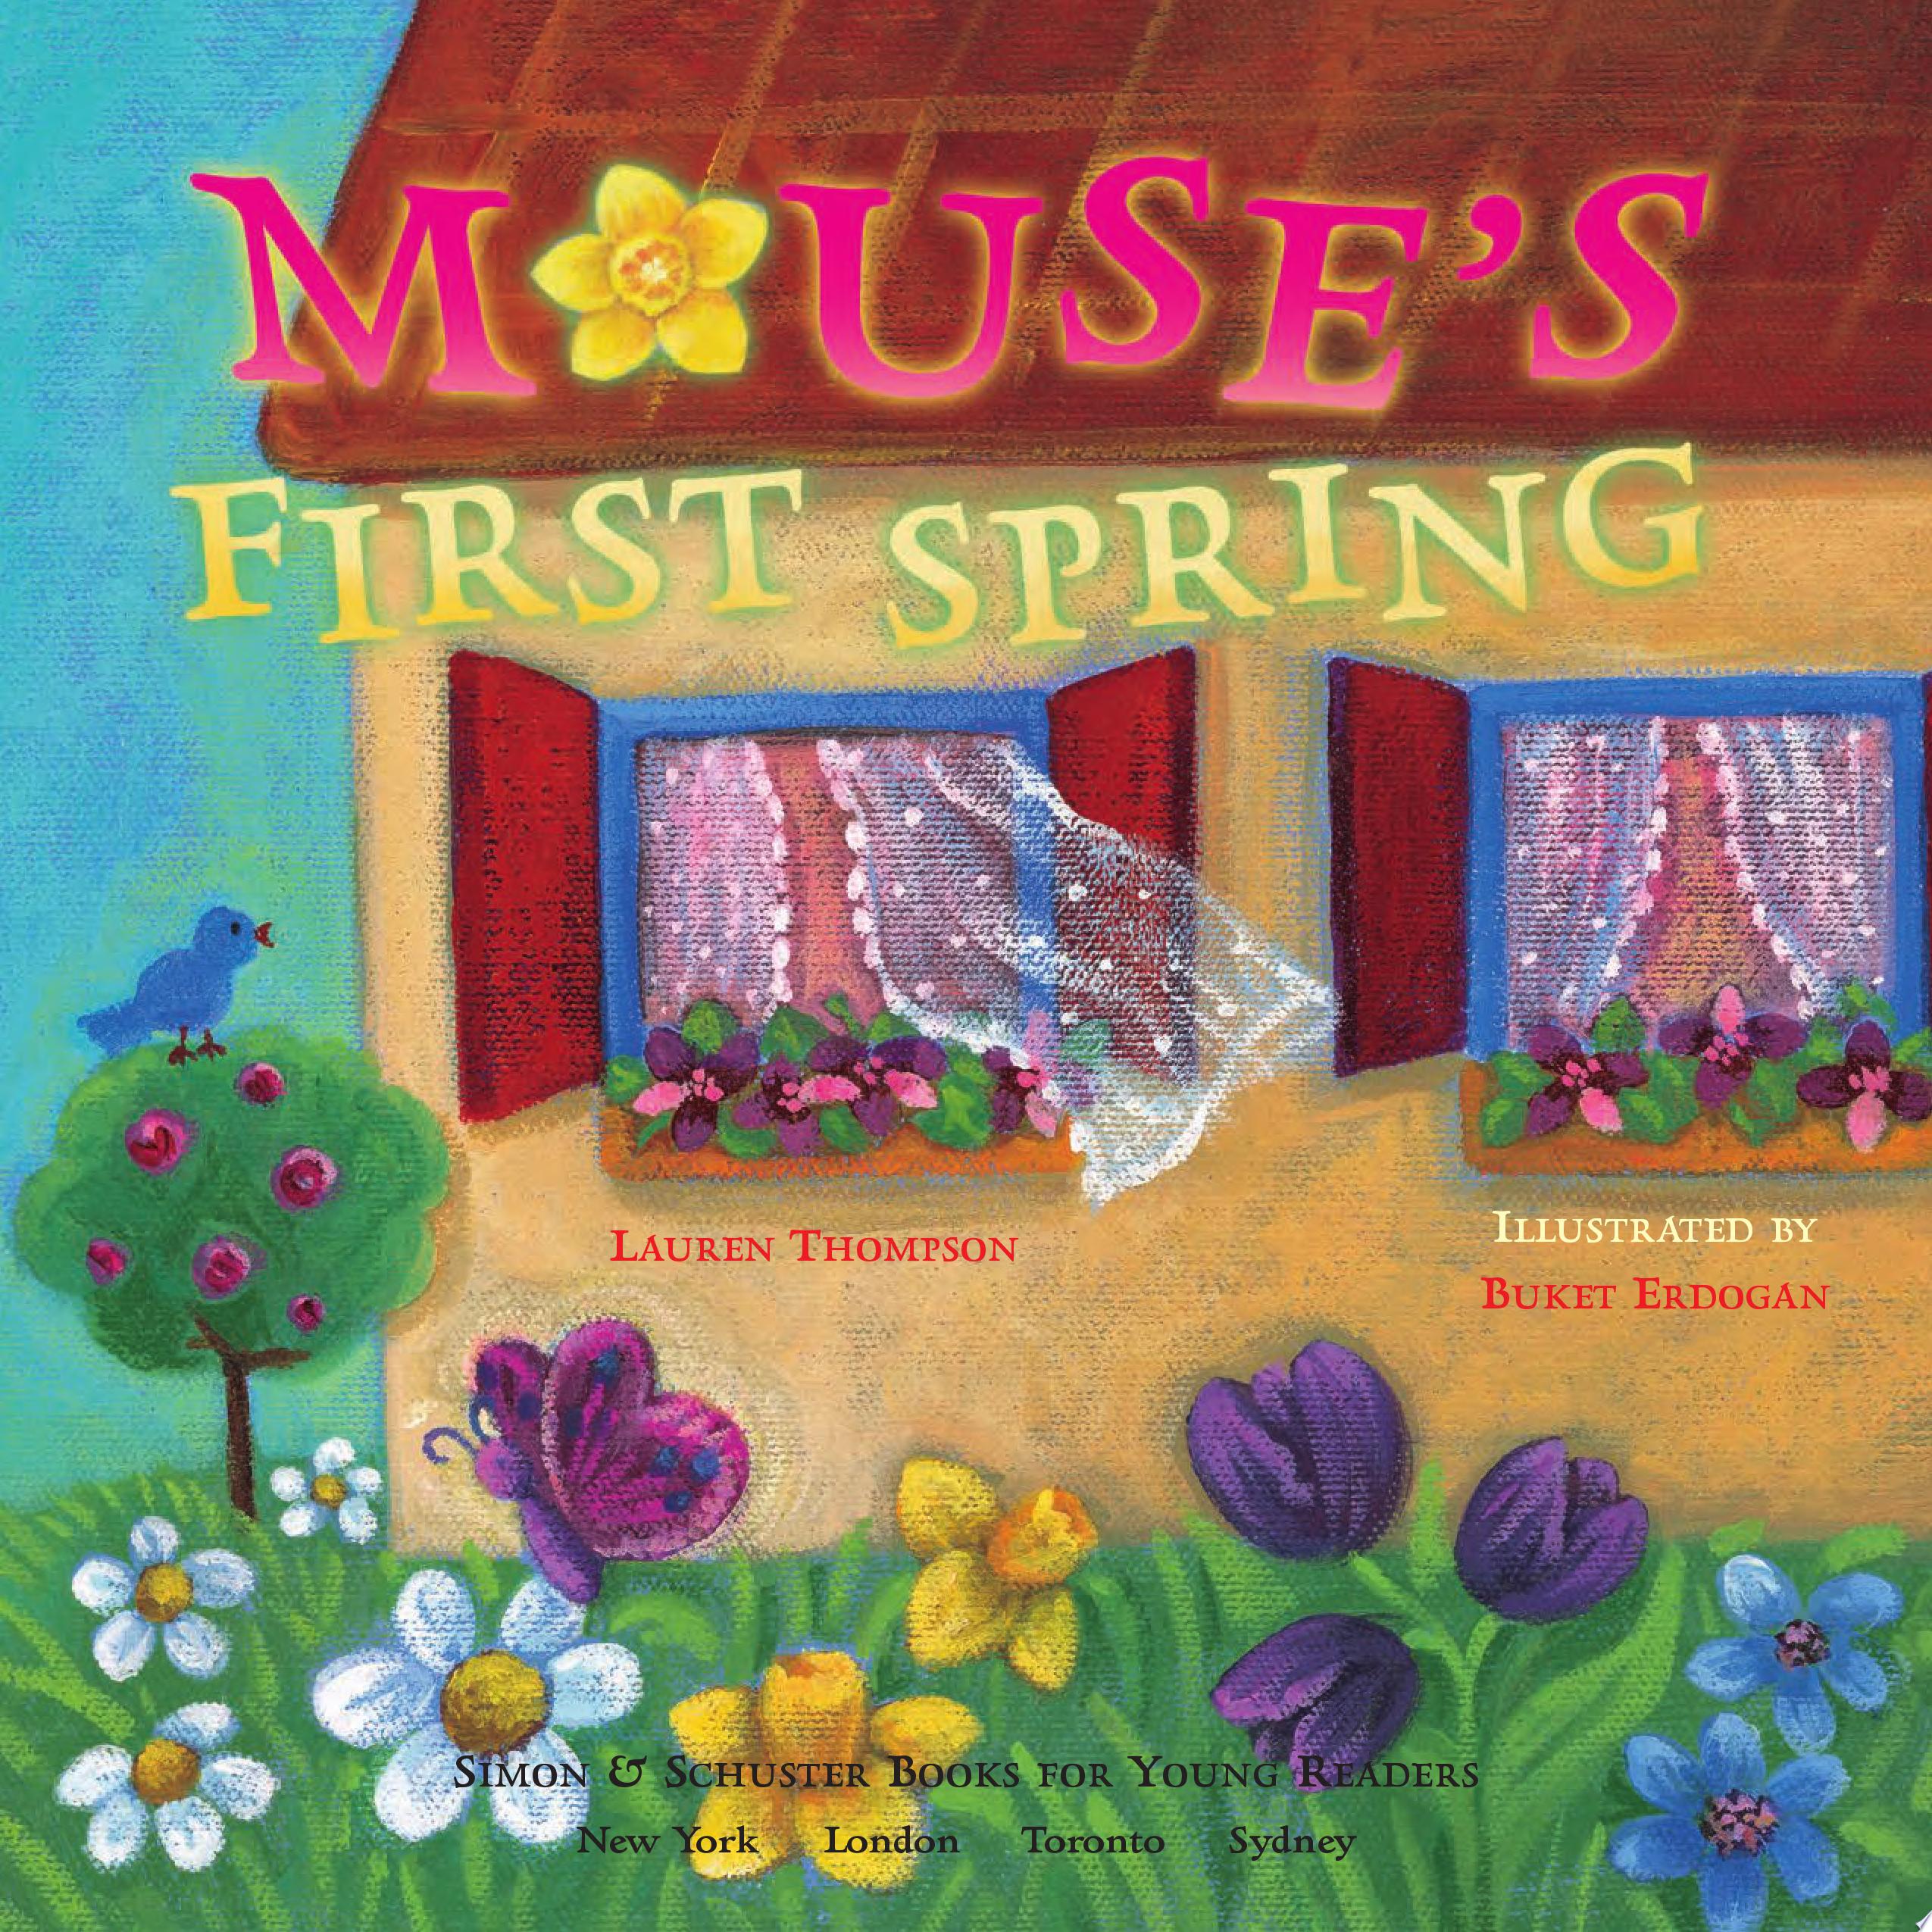 Image for "Mouse's First Spring"